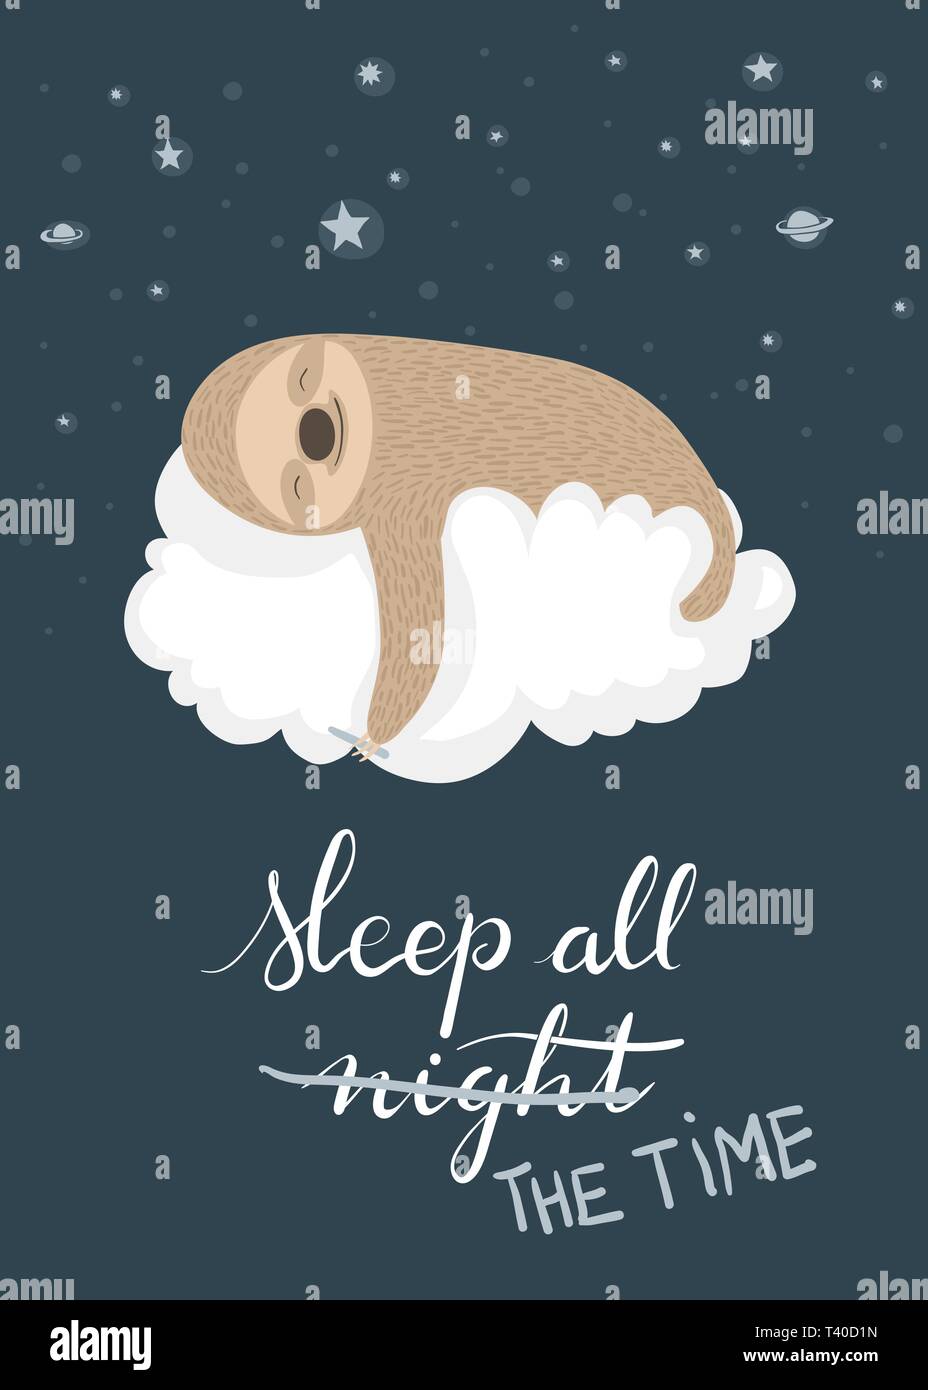 Cute cartoon sloth sleeping on a cloud holding a crayon with handlettered Sleep all night / All the time text. Suitable for t-shirt or poster design. Stock Vector